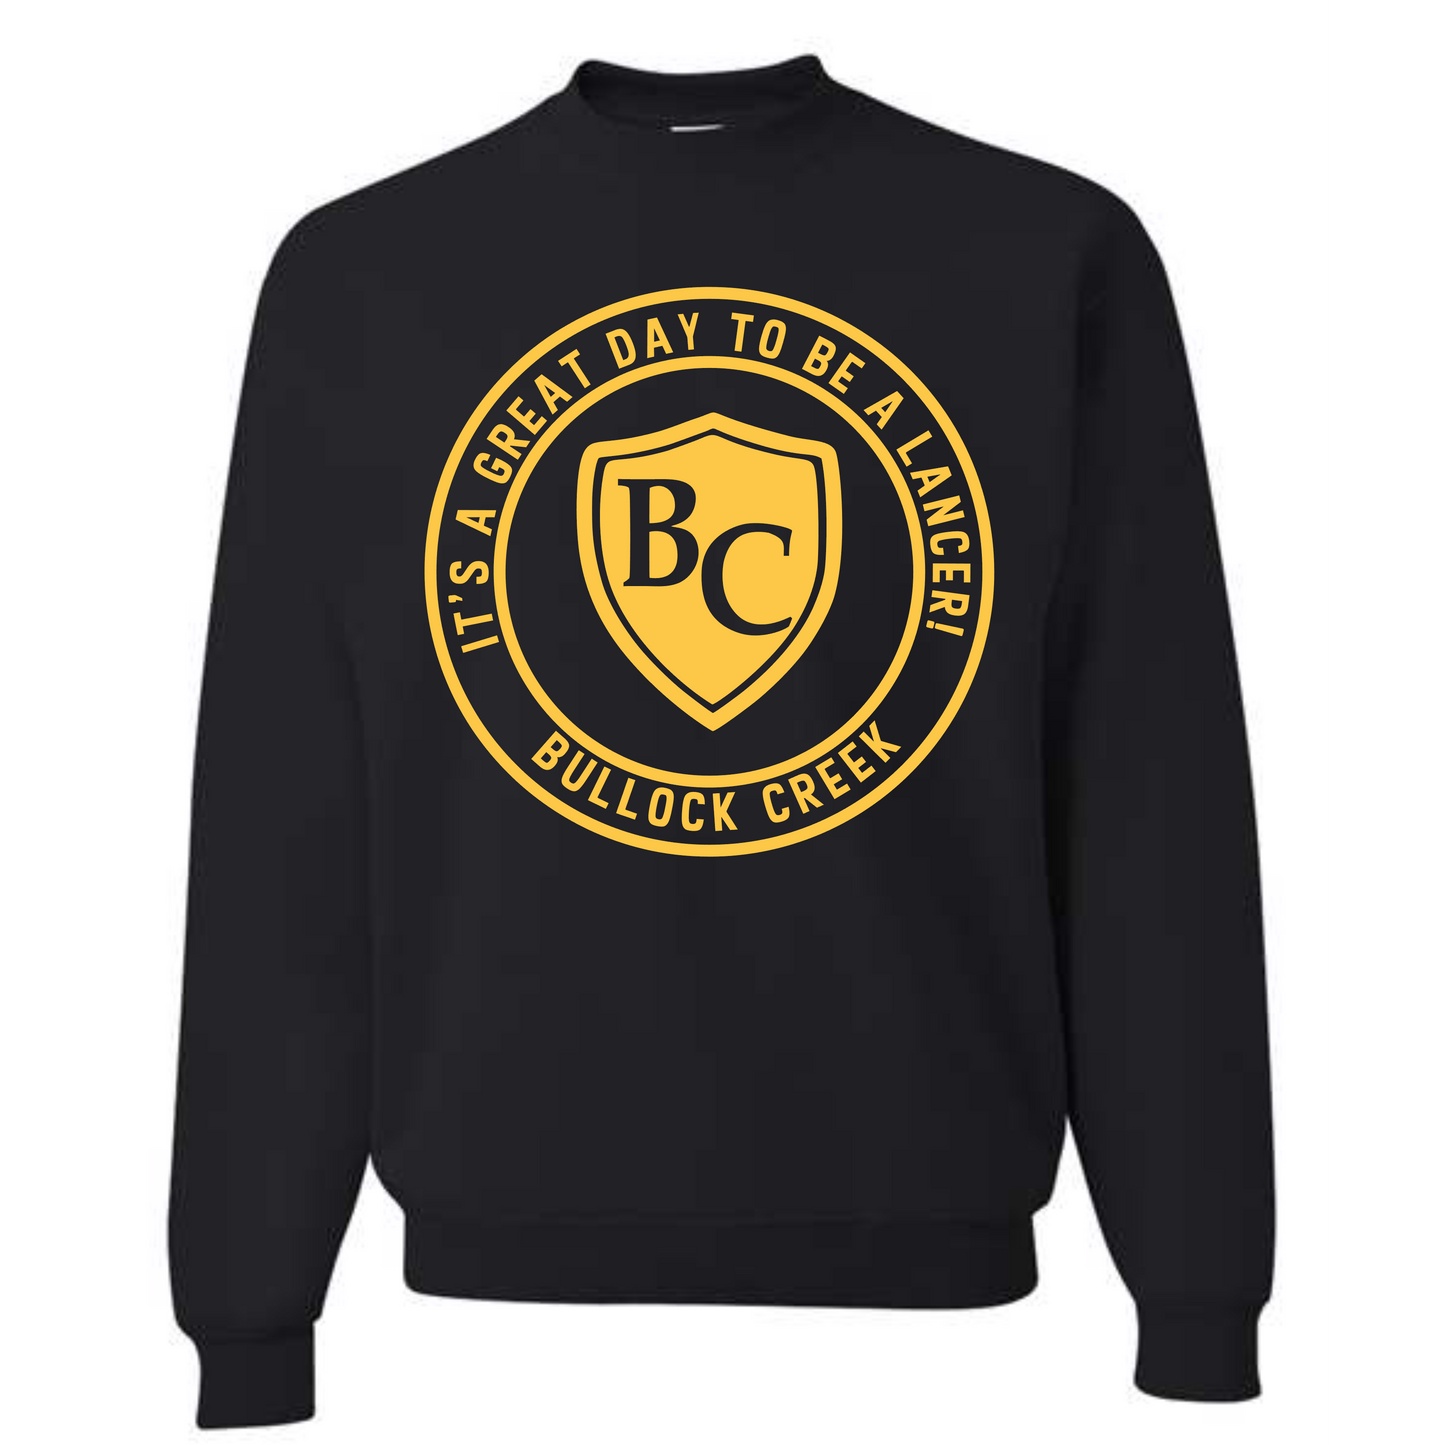 Bullock Creek Lancers - It's A Great Day To Be A Lancer Sweatshirt (Youth & Adult Sizes Available)